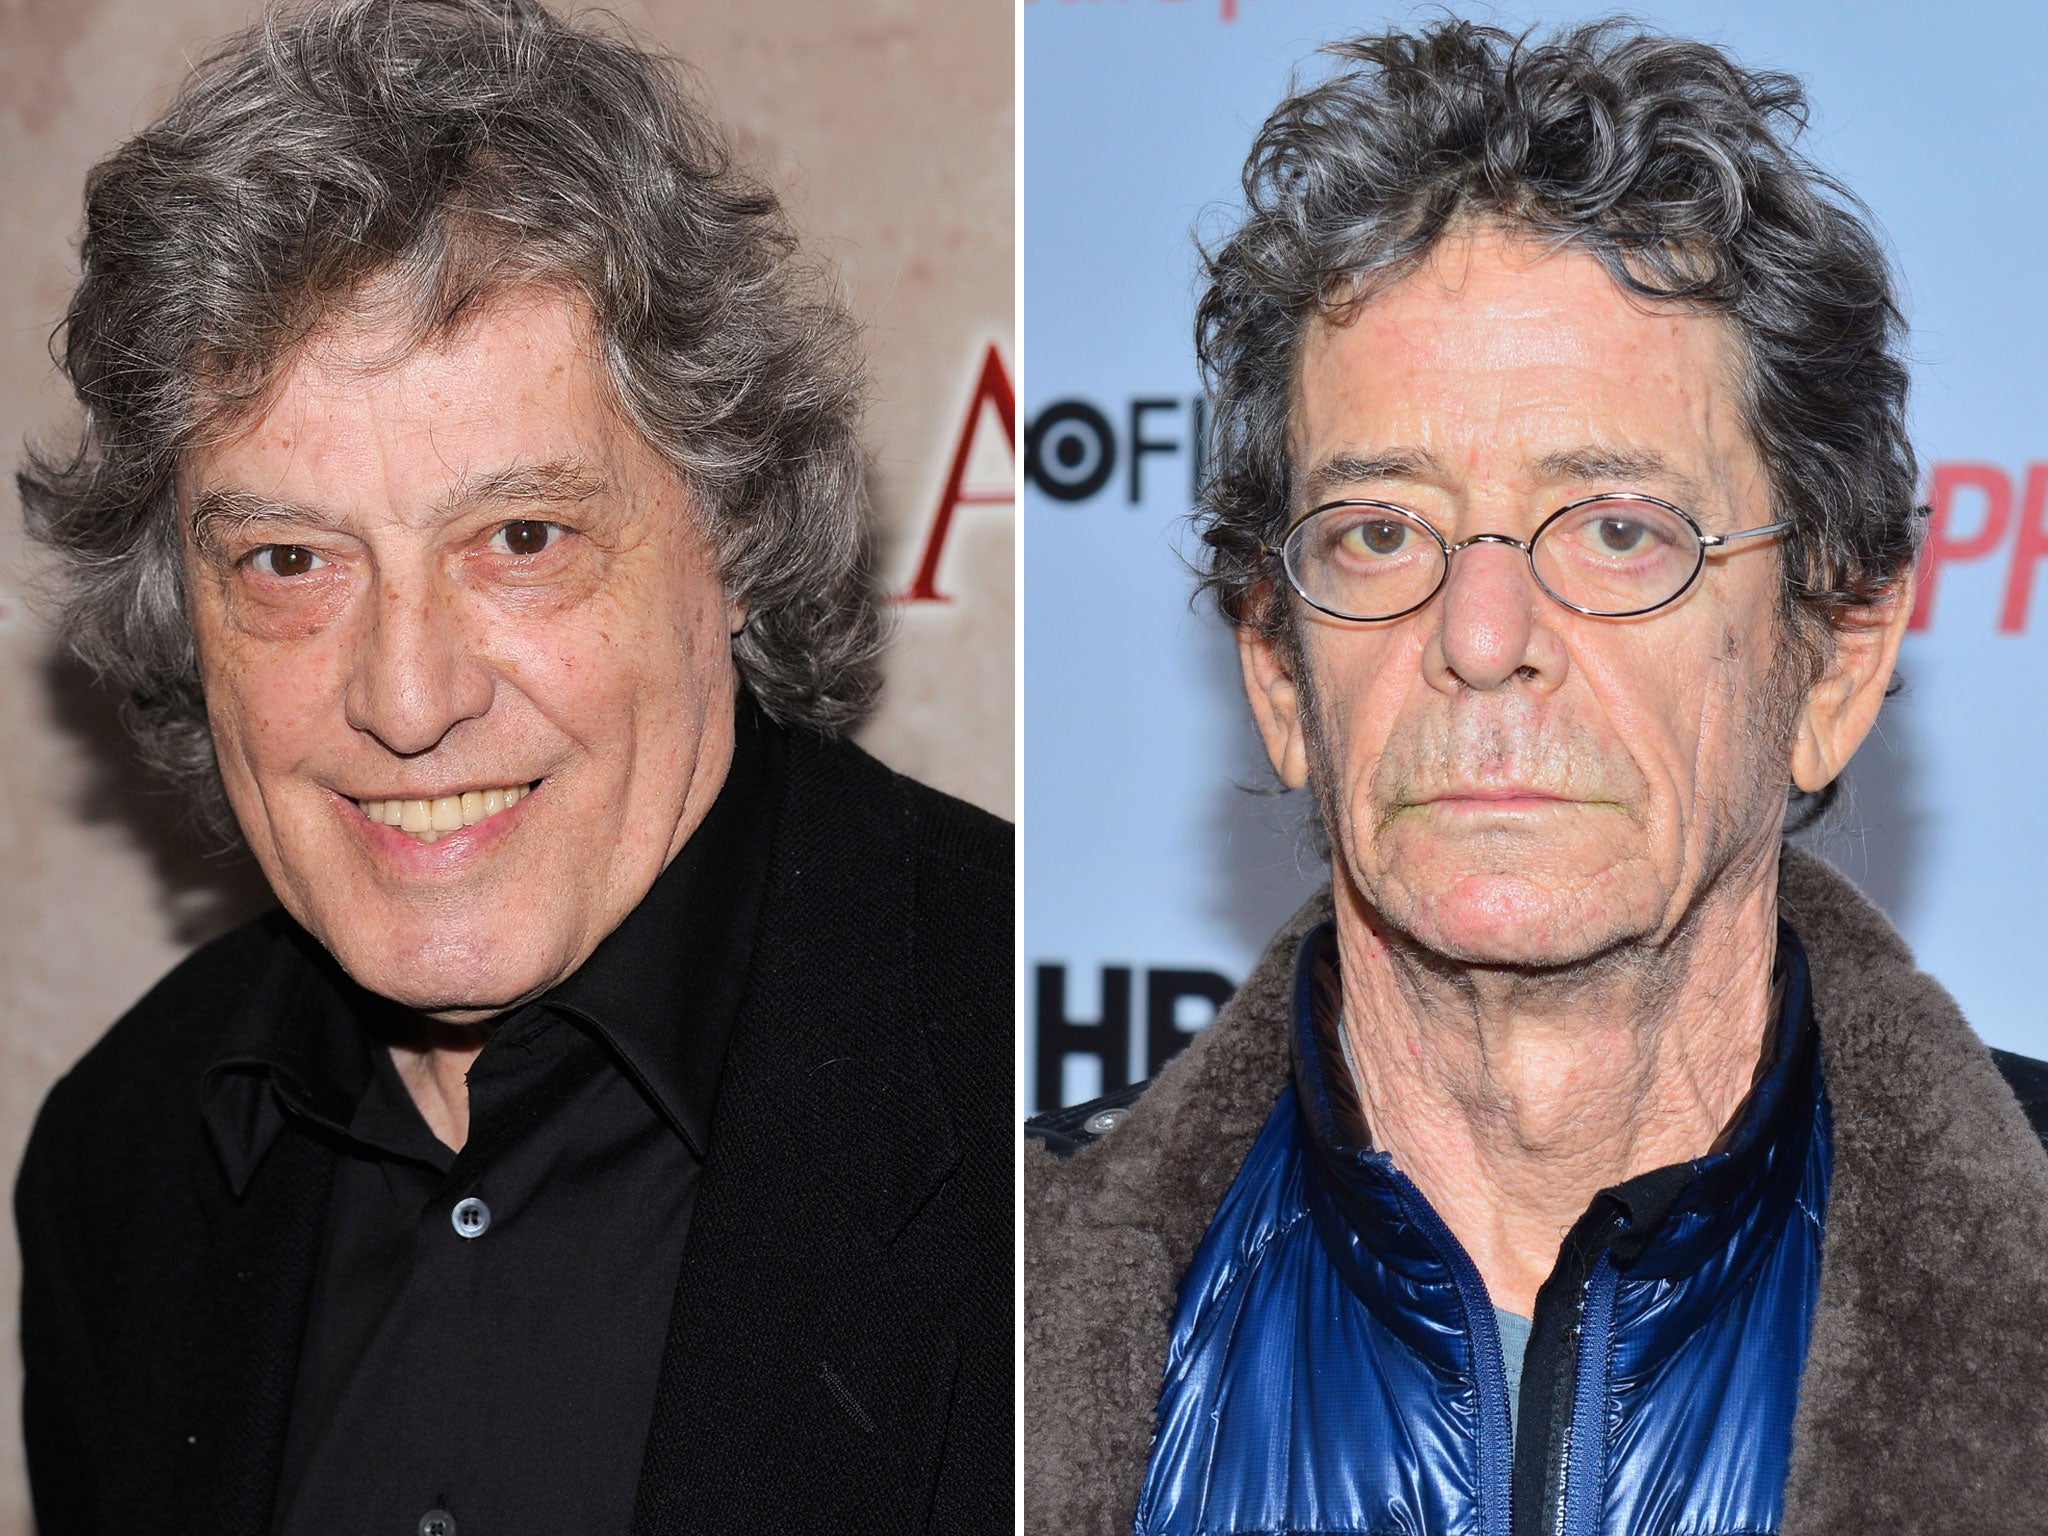 Sir Tom Stoppard has joined the high-profile cultural figures paying tribute to Lou Reed